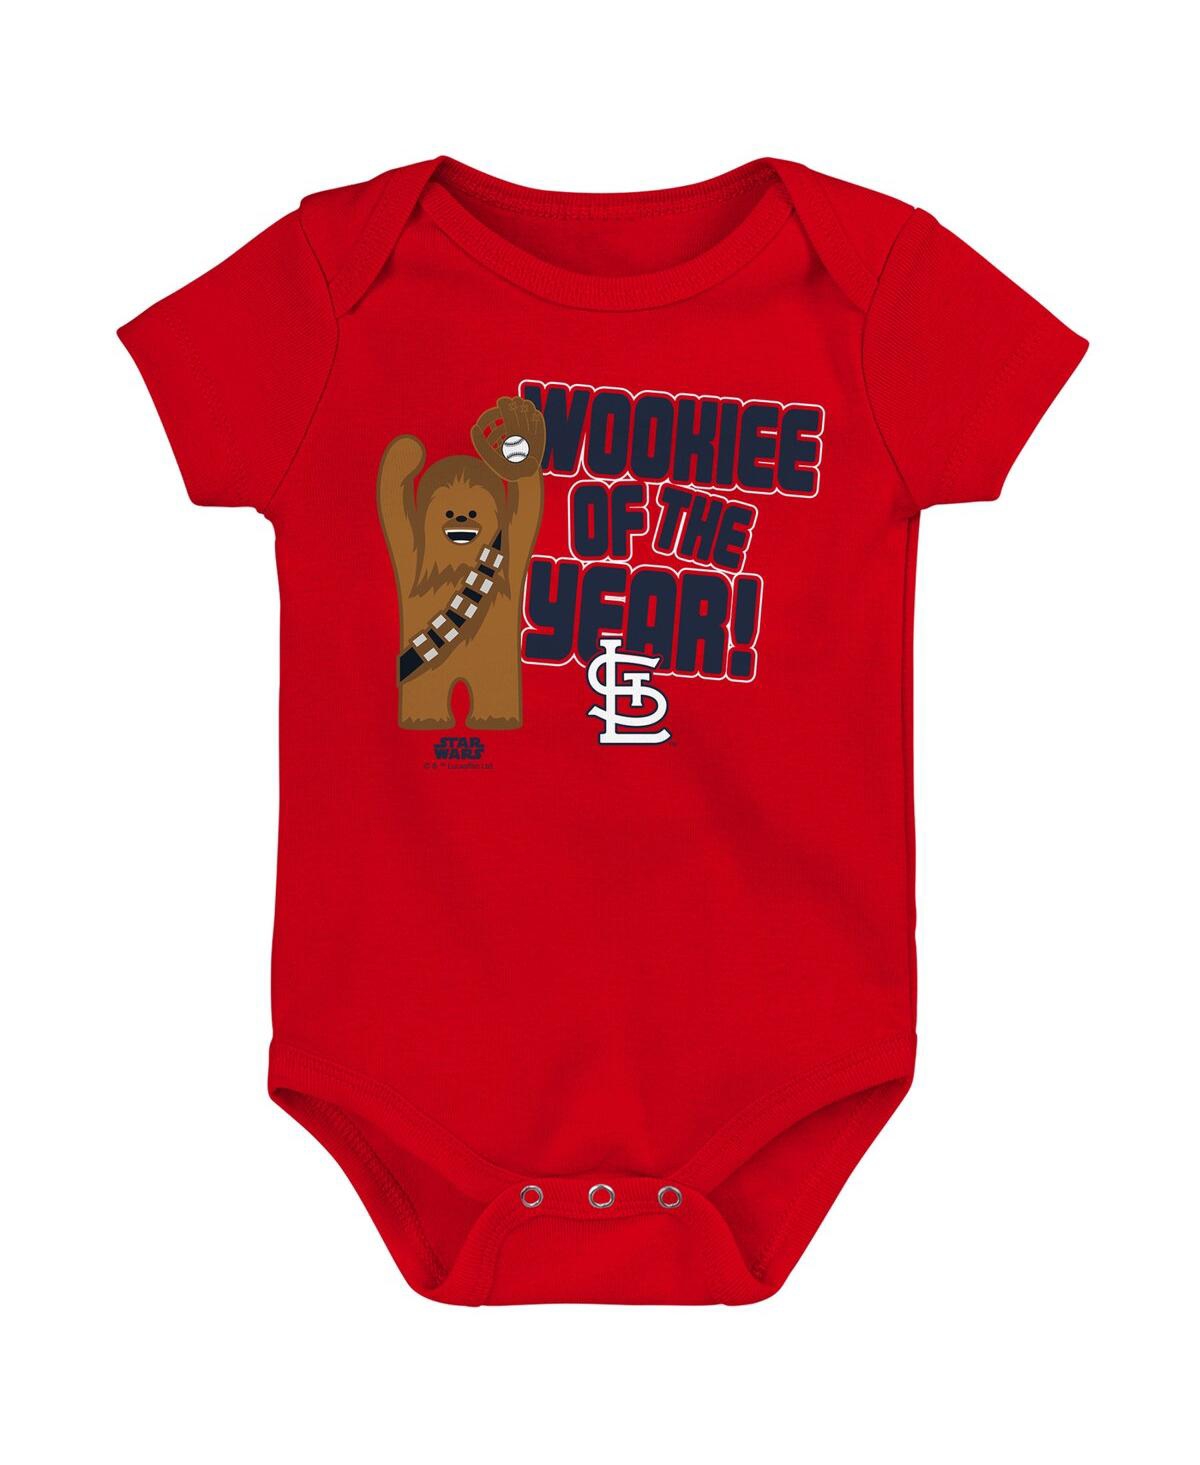 Shop Outerstuff Newborn And Infant Boys And Girls Red St. Louis Cardinals Star Wars Wookie Of The Year Bodysuit